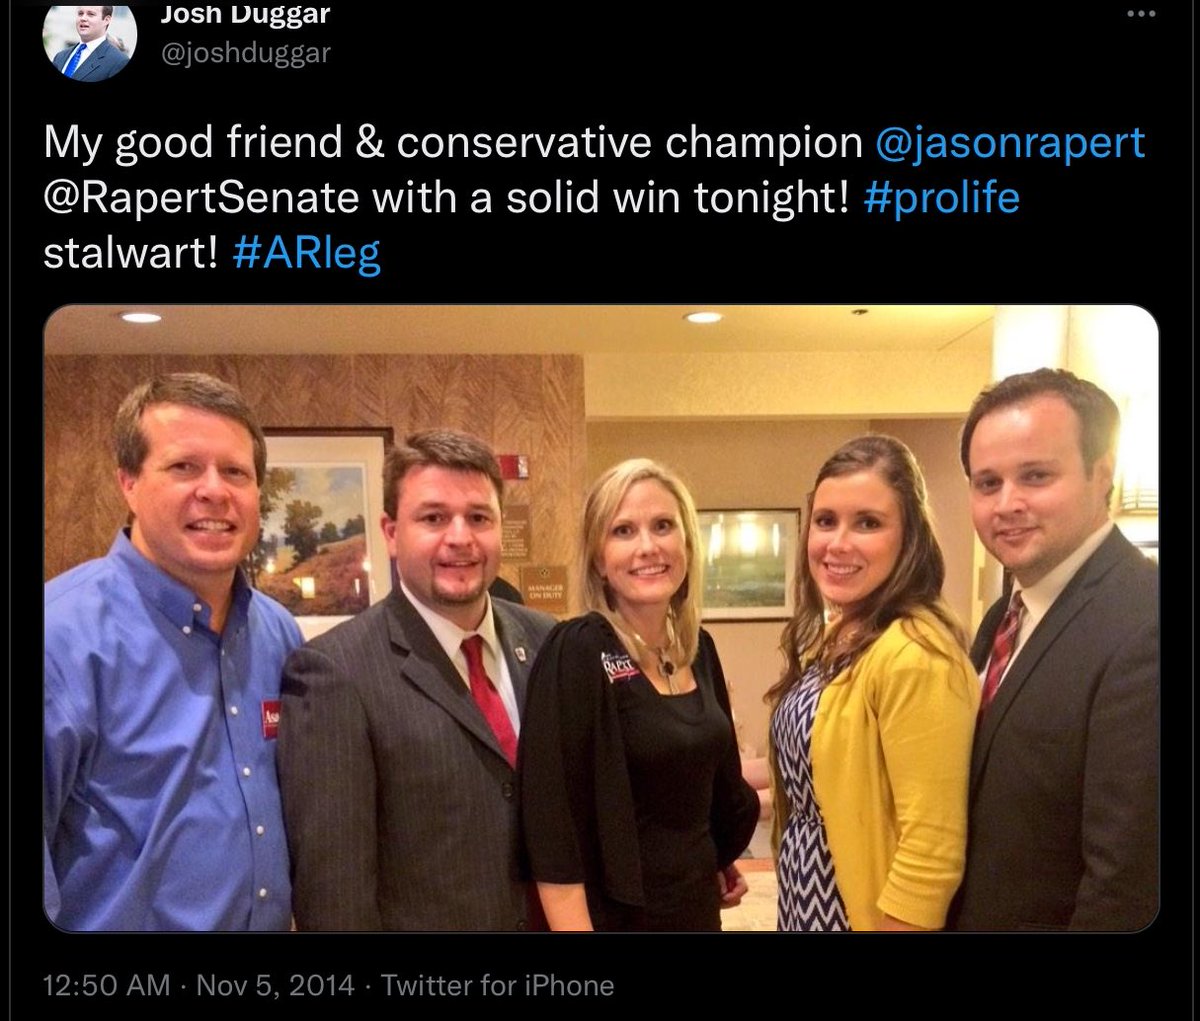 Imagine being honored that Rapey endorses you. Did y’all know that @jasonrapert is good friends with Josh Duggar?